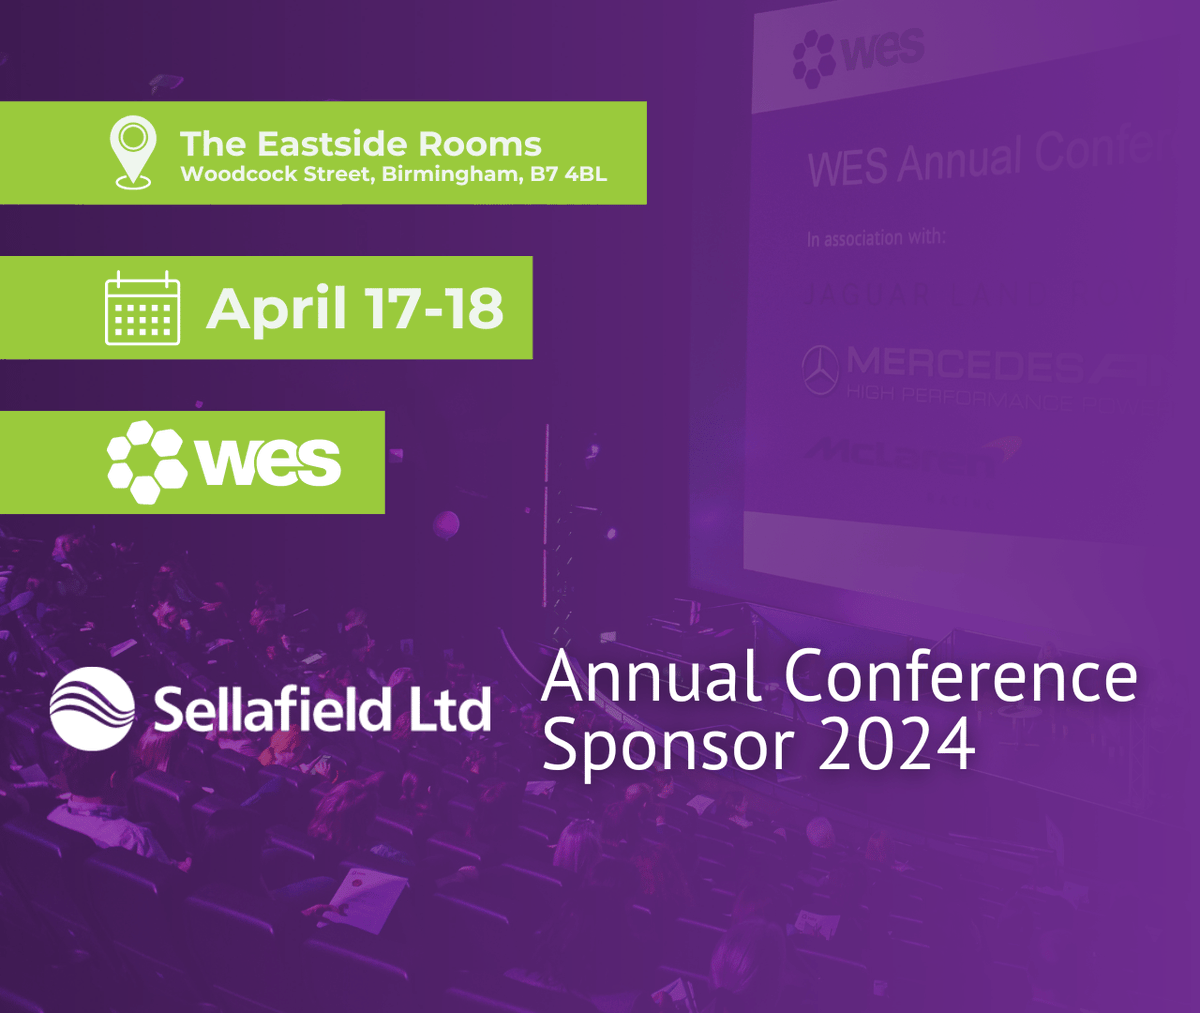 The Annual Conference is almost here, and we’re overjoyed to have Sellafield on board as a sponsor! The Birmingham event is set to be spectacular, thanks to all our generous sponsors. See you in 3 days! Read more about Sellafield: ow.ly/Wr4b50RfOlH #WESAnnualConference